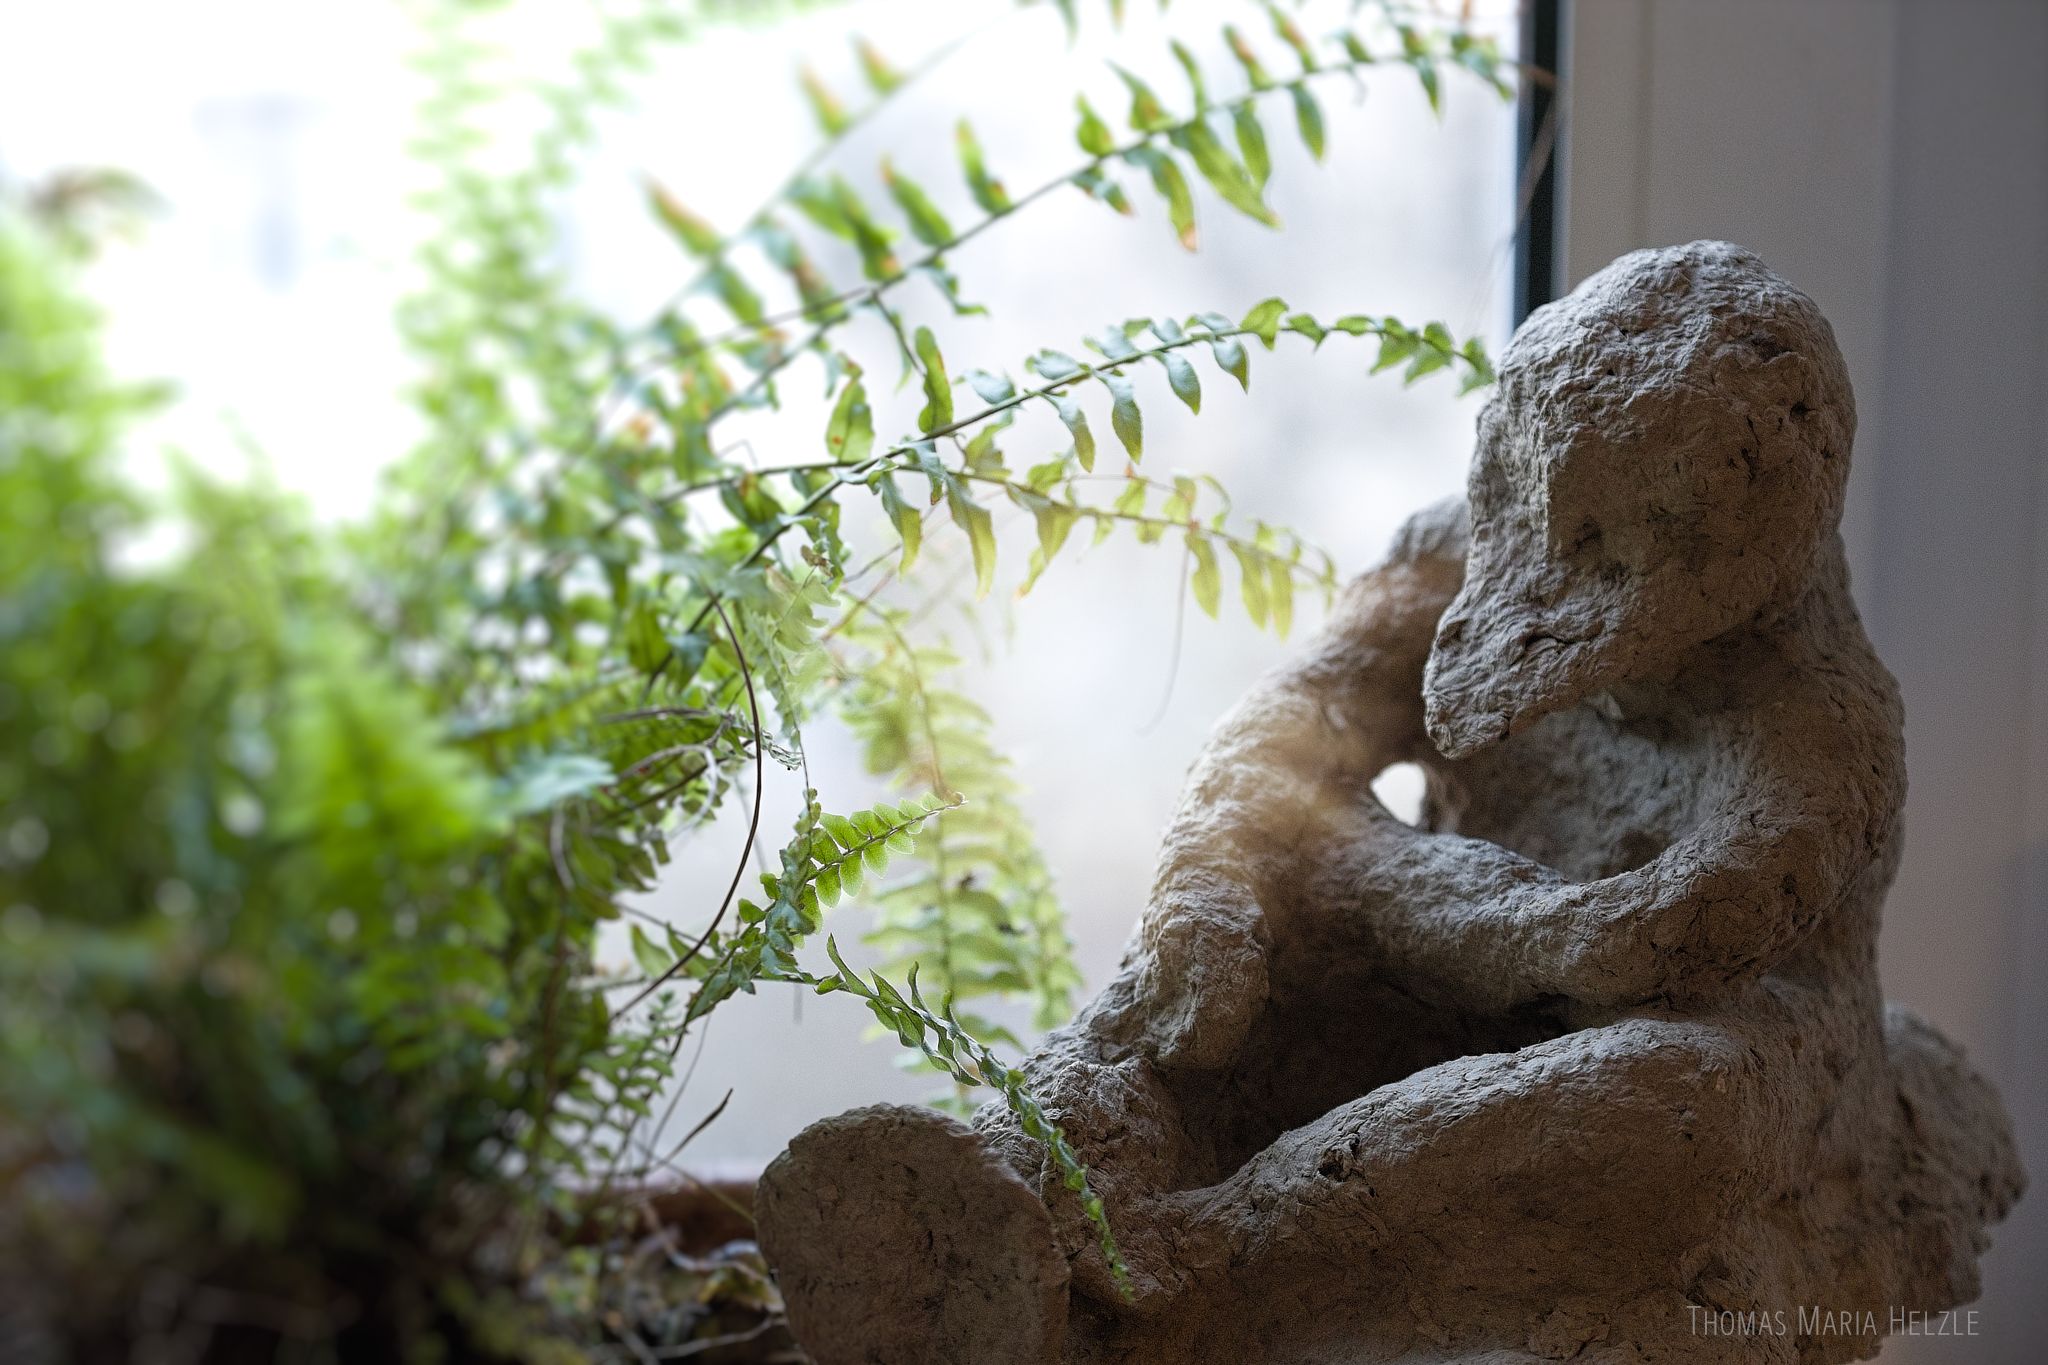 'The Duckman', a sculpture made of papier-mâché with a duck bill and big feet, sitting at my window next to a fern plant and looking thoughtfully...;-)